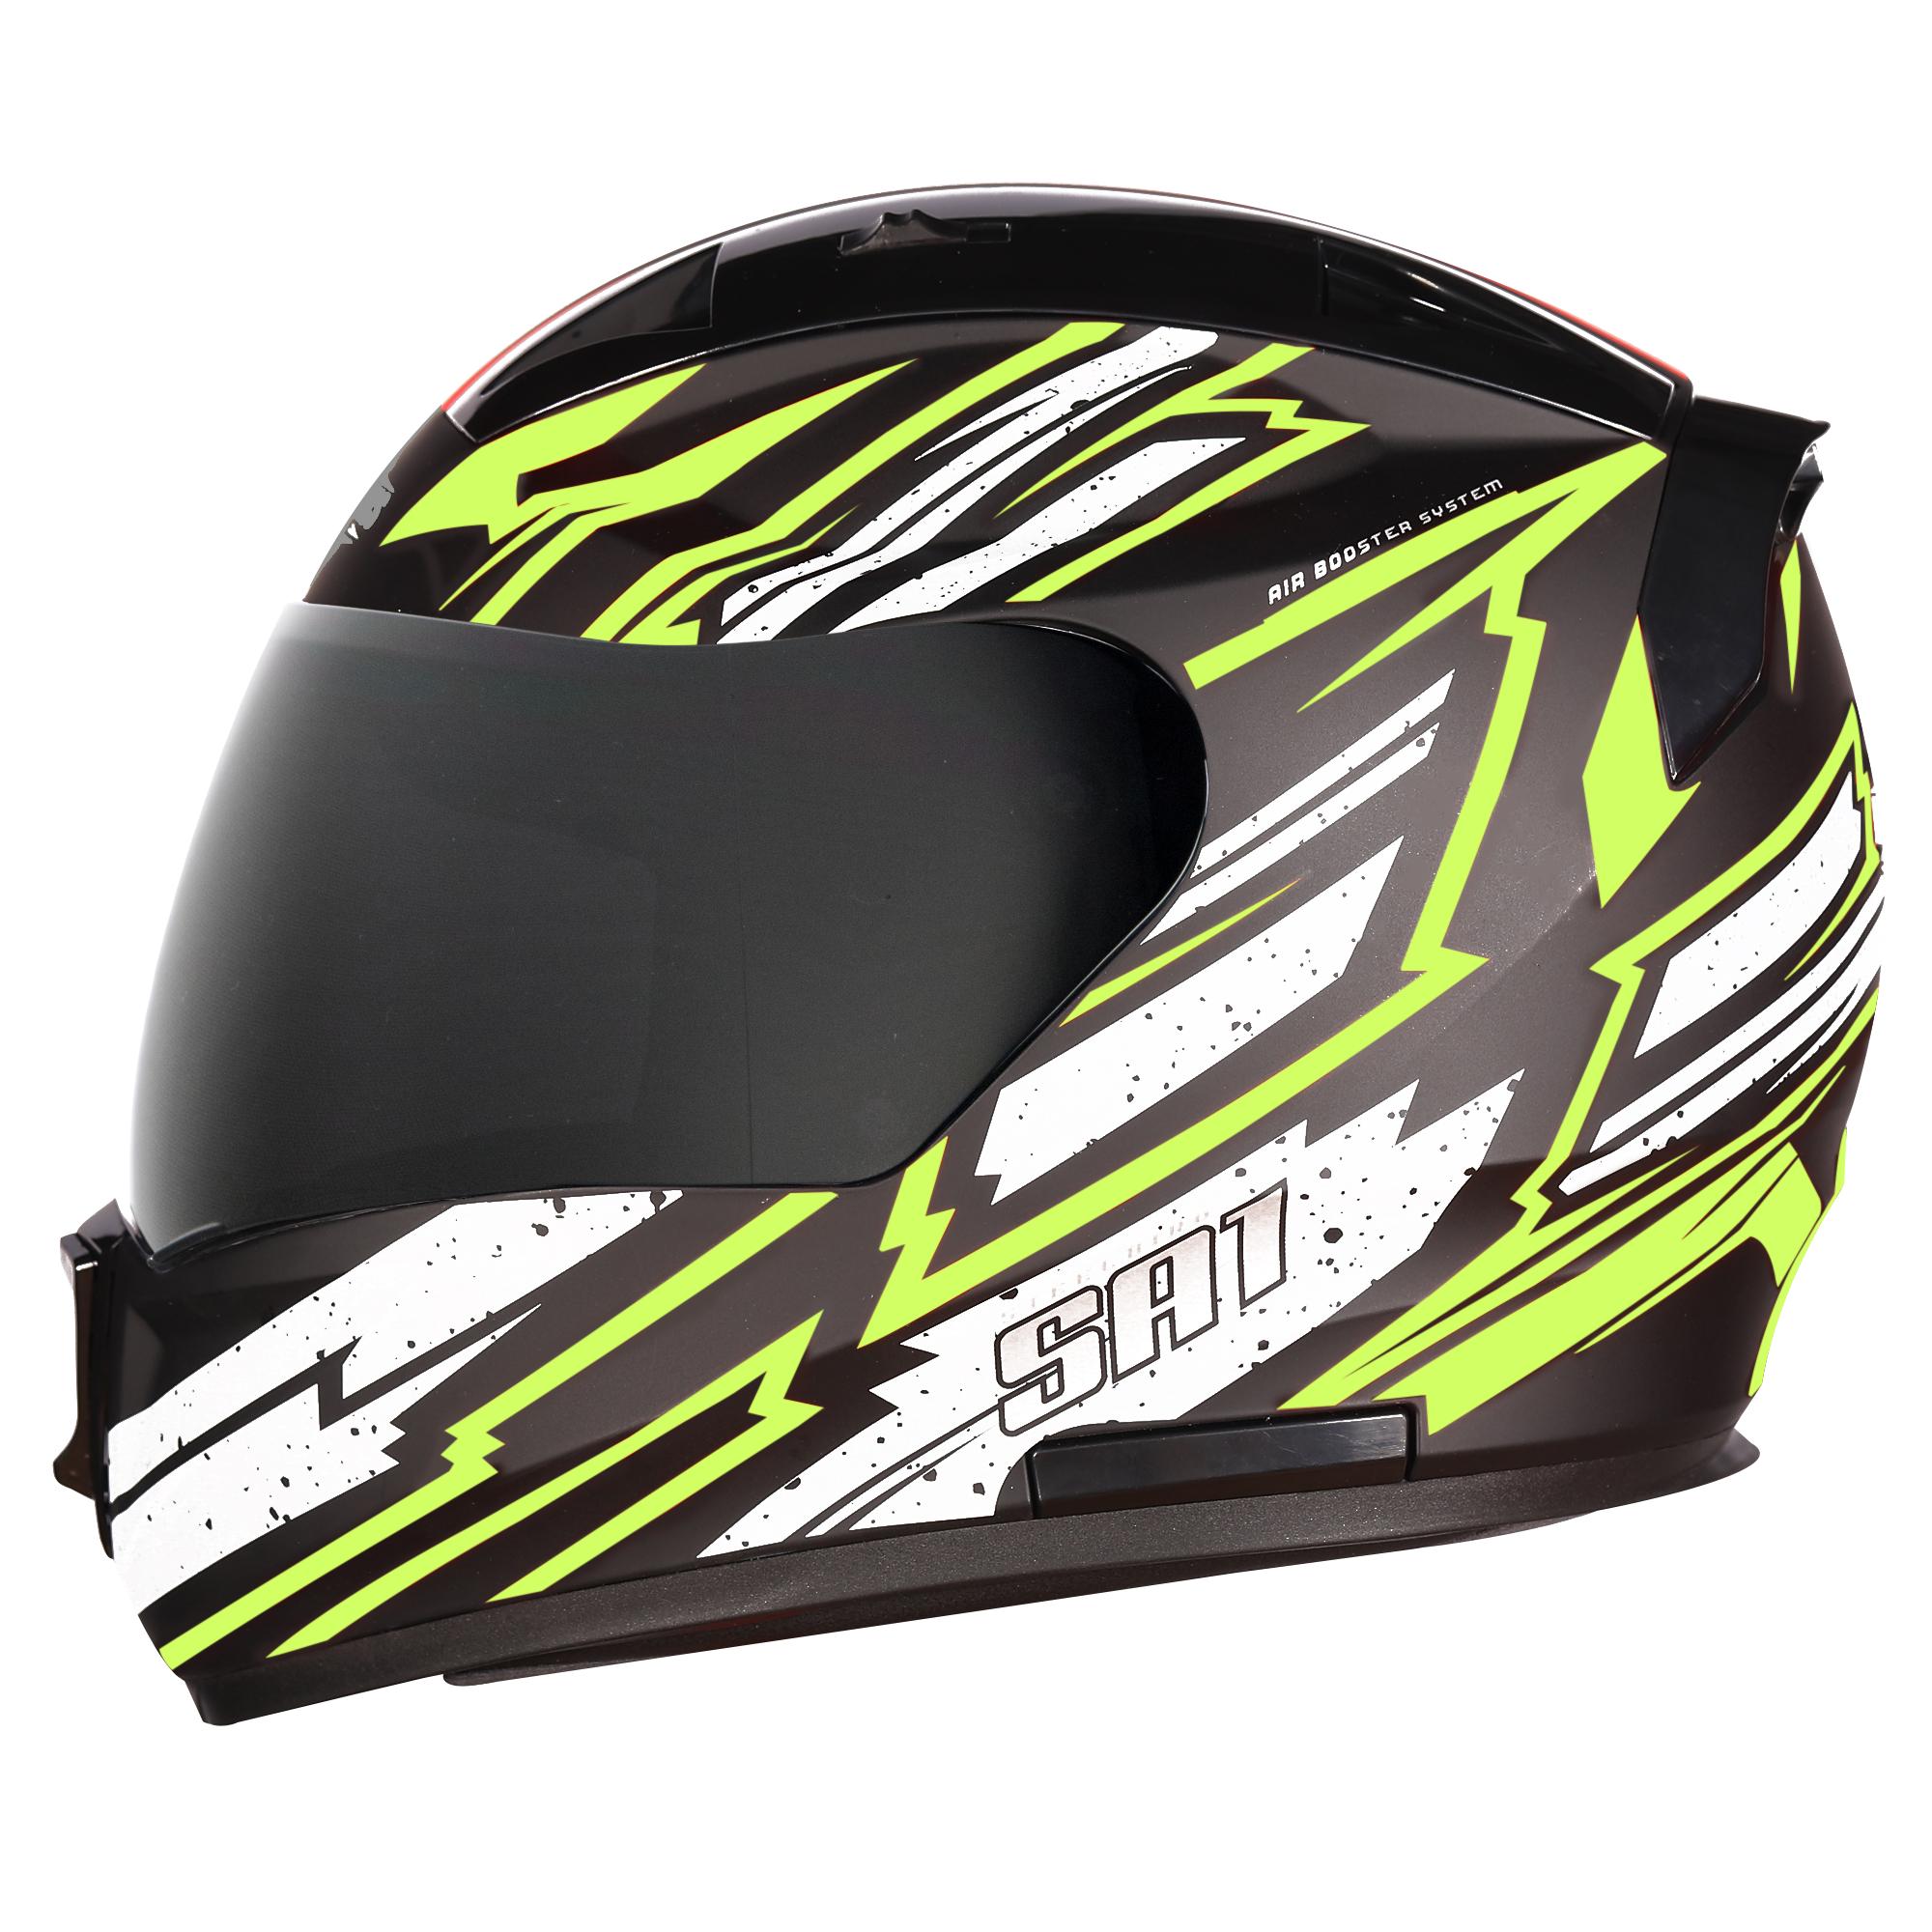 SA-1 BOOSTER MAT BLACK WITH NEON - SMOKE VISOR (WITH EXTRA CLEAR VISOR)